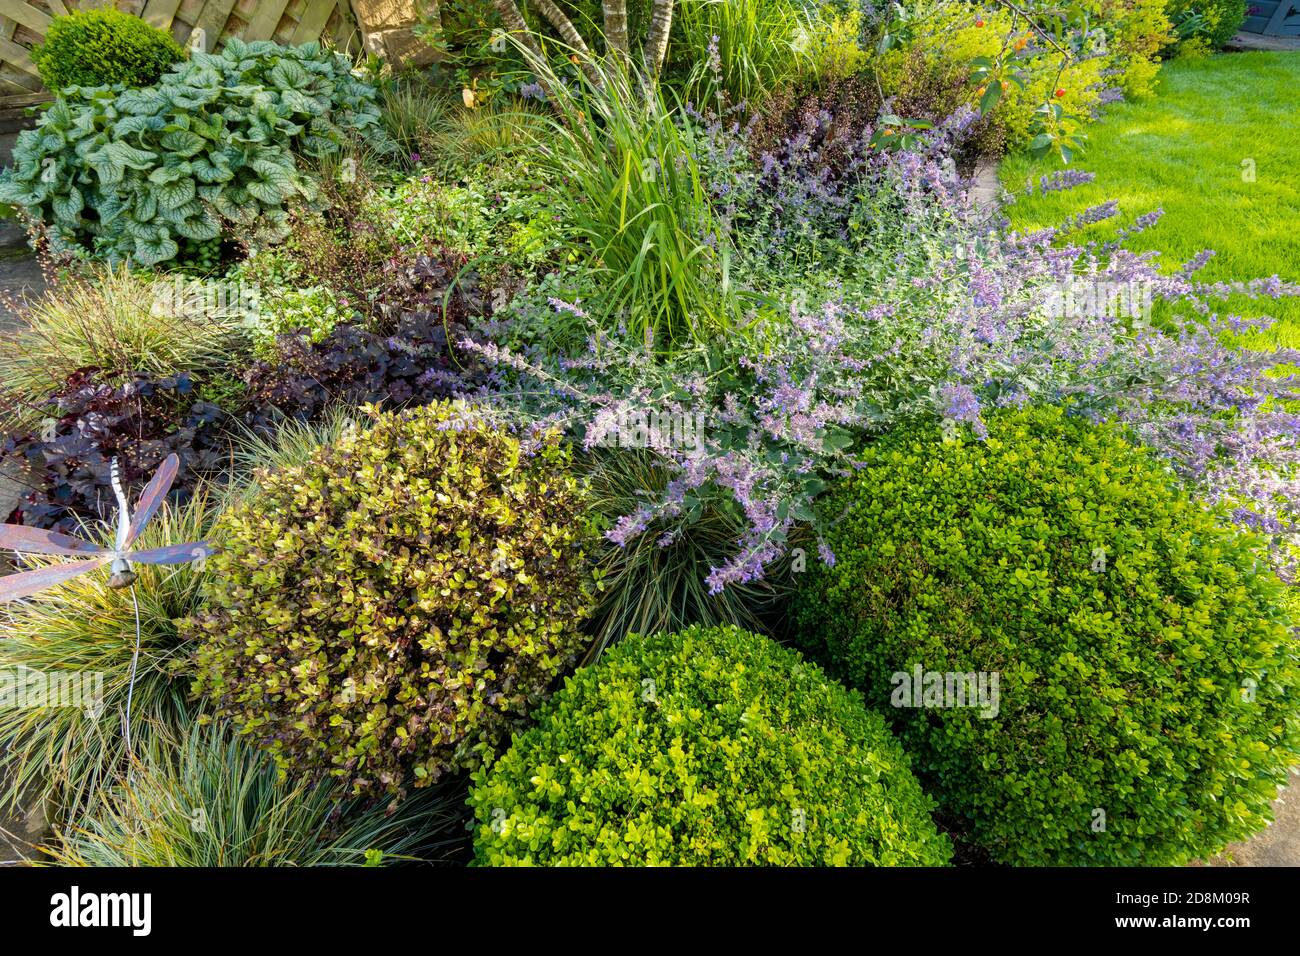 Landscaped private garden close-up (summer flowers, colourful foliage, mixed border plants, box balls, ornamental stake, lawn) - Yorkshire, England UK Stock Photo